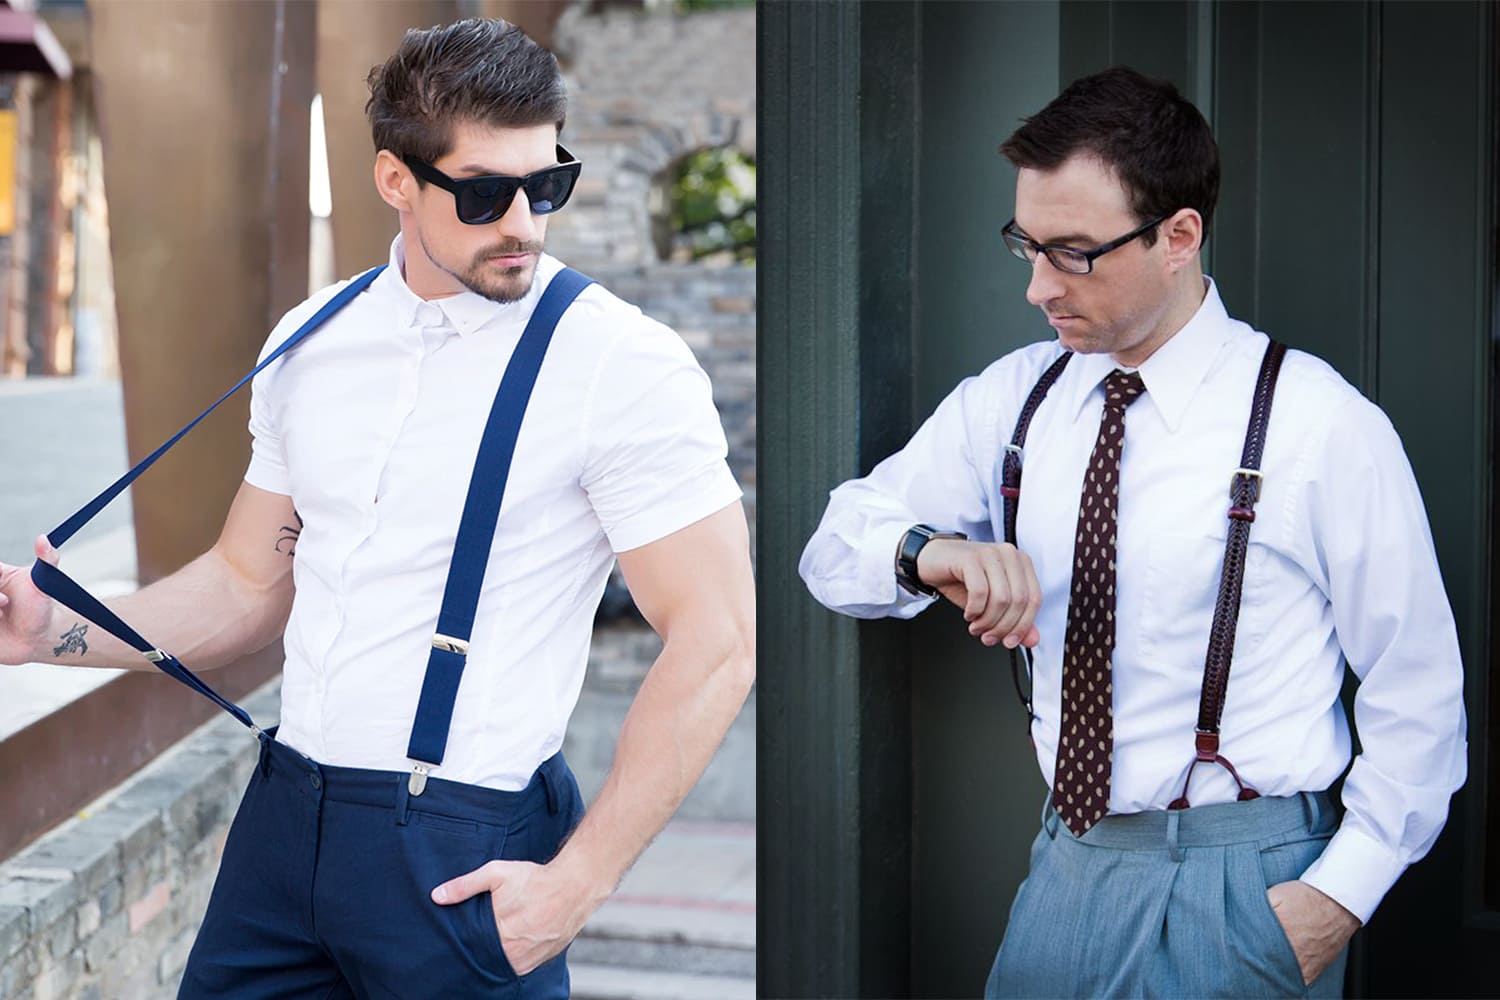 How To Wear Suspenders 5 Men S Suspenders Style Guide To Stand Out